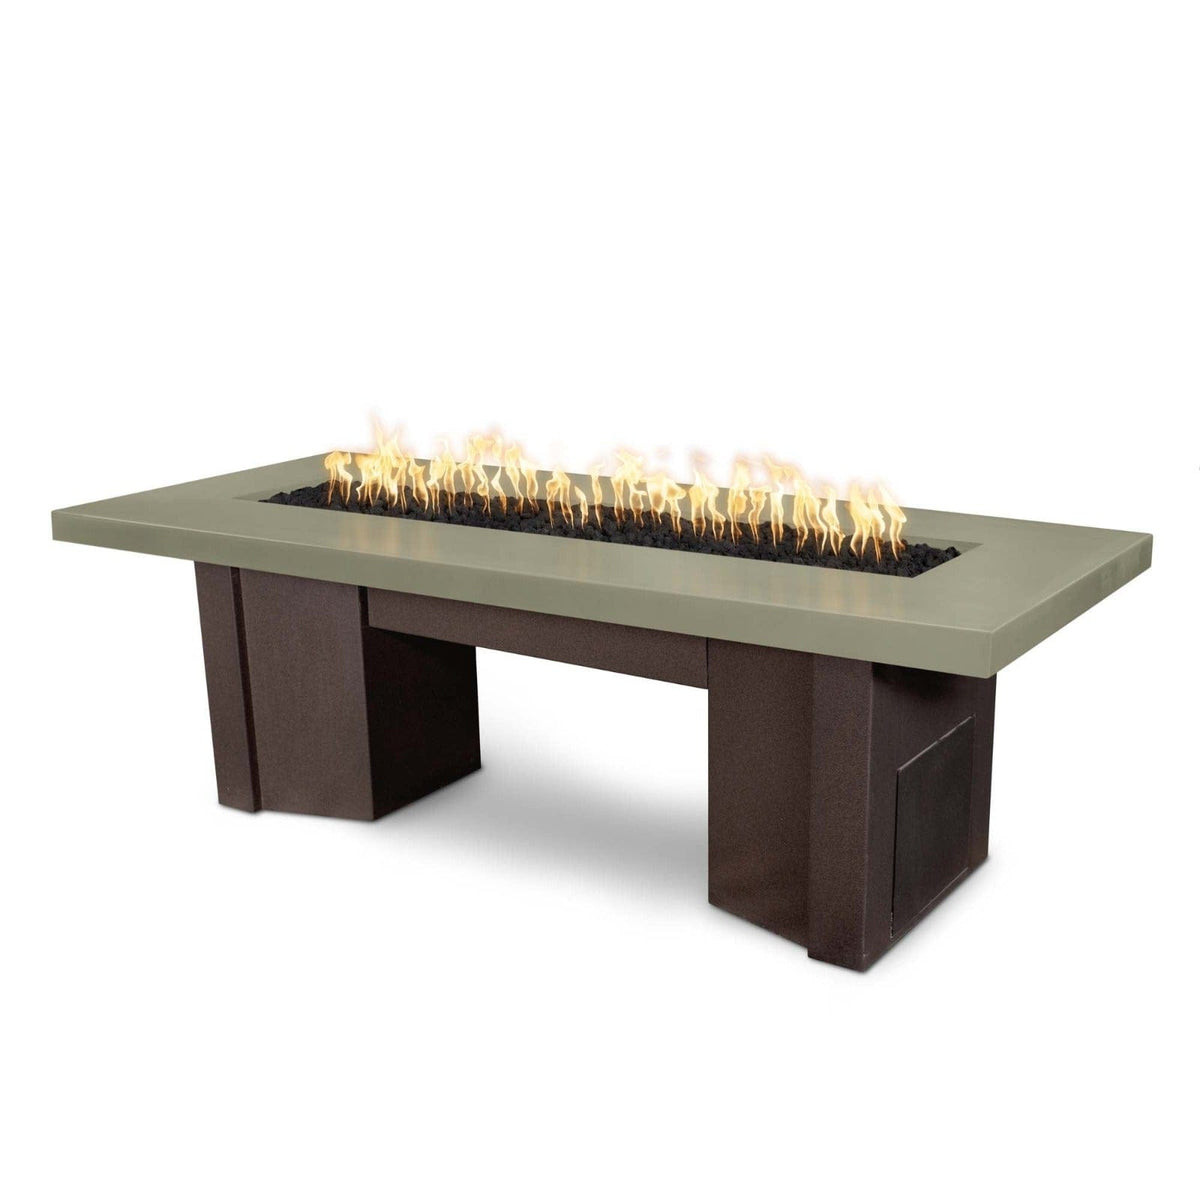 The Outdoor Plus Fire Features Ash (-ASH) / Java Powder Coated Steel (-JAV) The Outdoor Plus 78&quot; Alameda Fire Table Smooth Concrete in Liquid Propane - Match Lit with Flame Sense System / OPT-ALMGFRC78FSML-LP